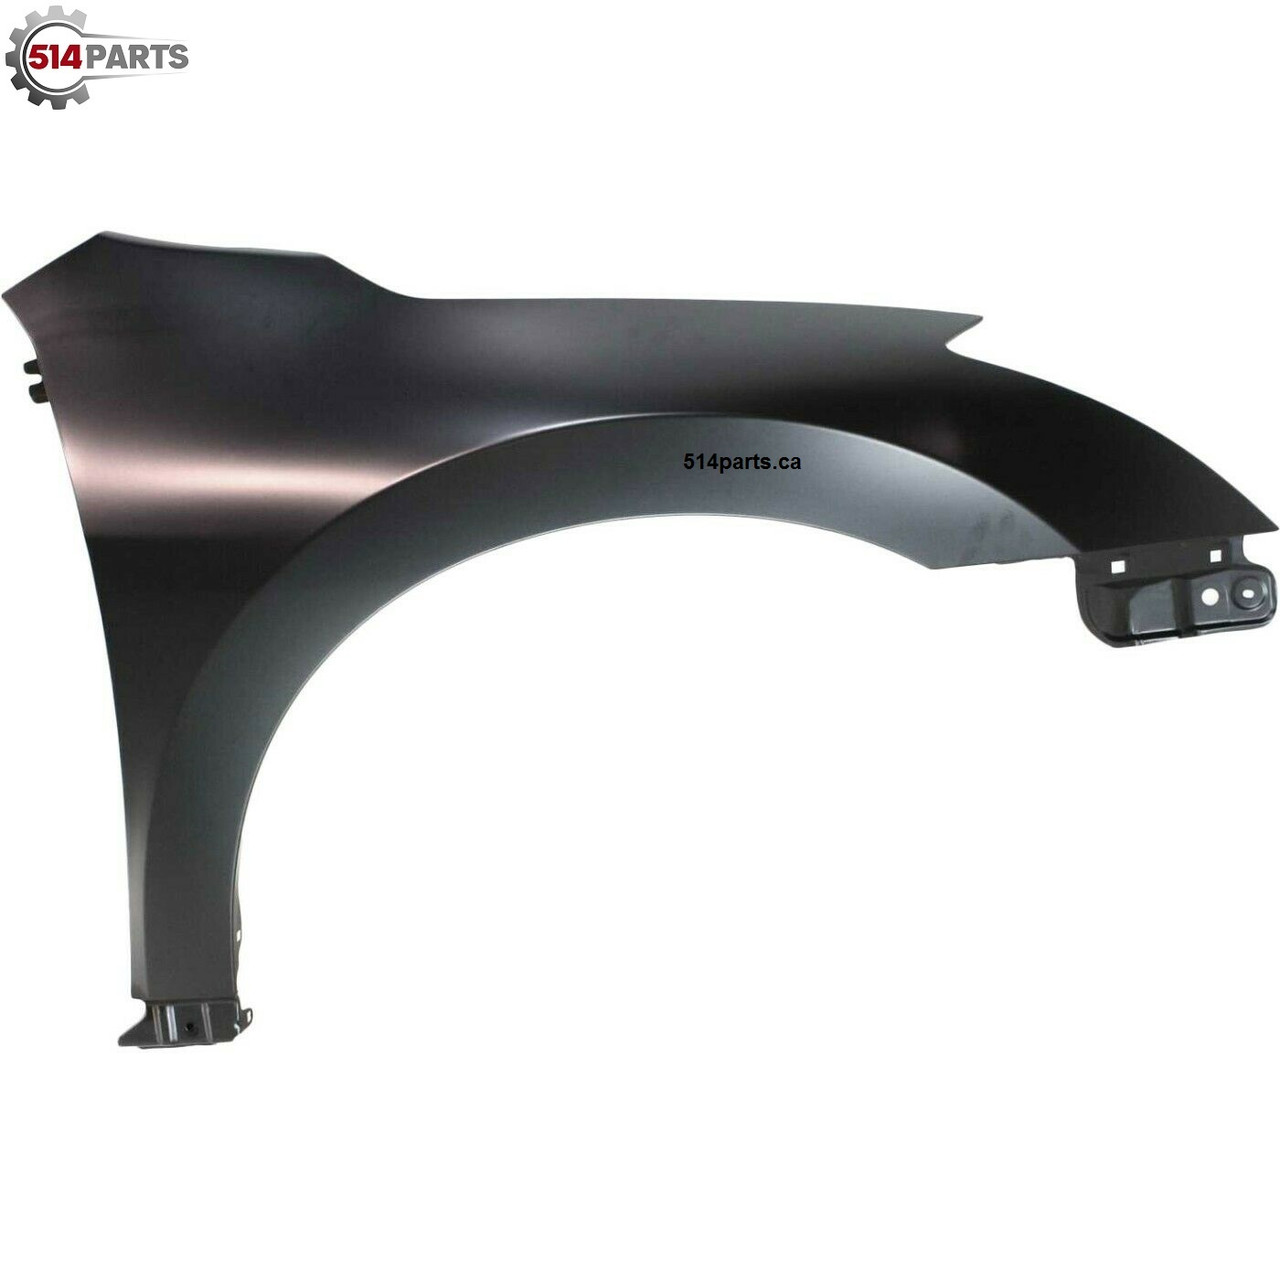 2007 - 2012 NISSAN ALTIMA and ALTIMA HYBRID CAPA Certified FRONT FENDERS - AILES AVANT CAPA Certifiee